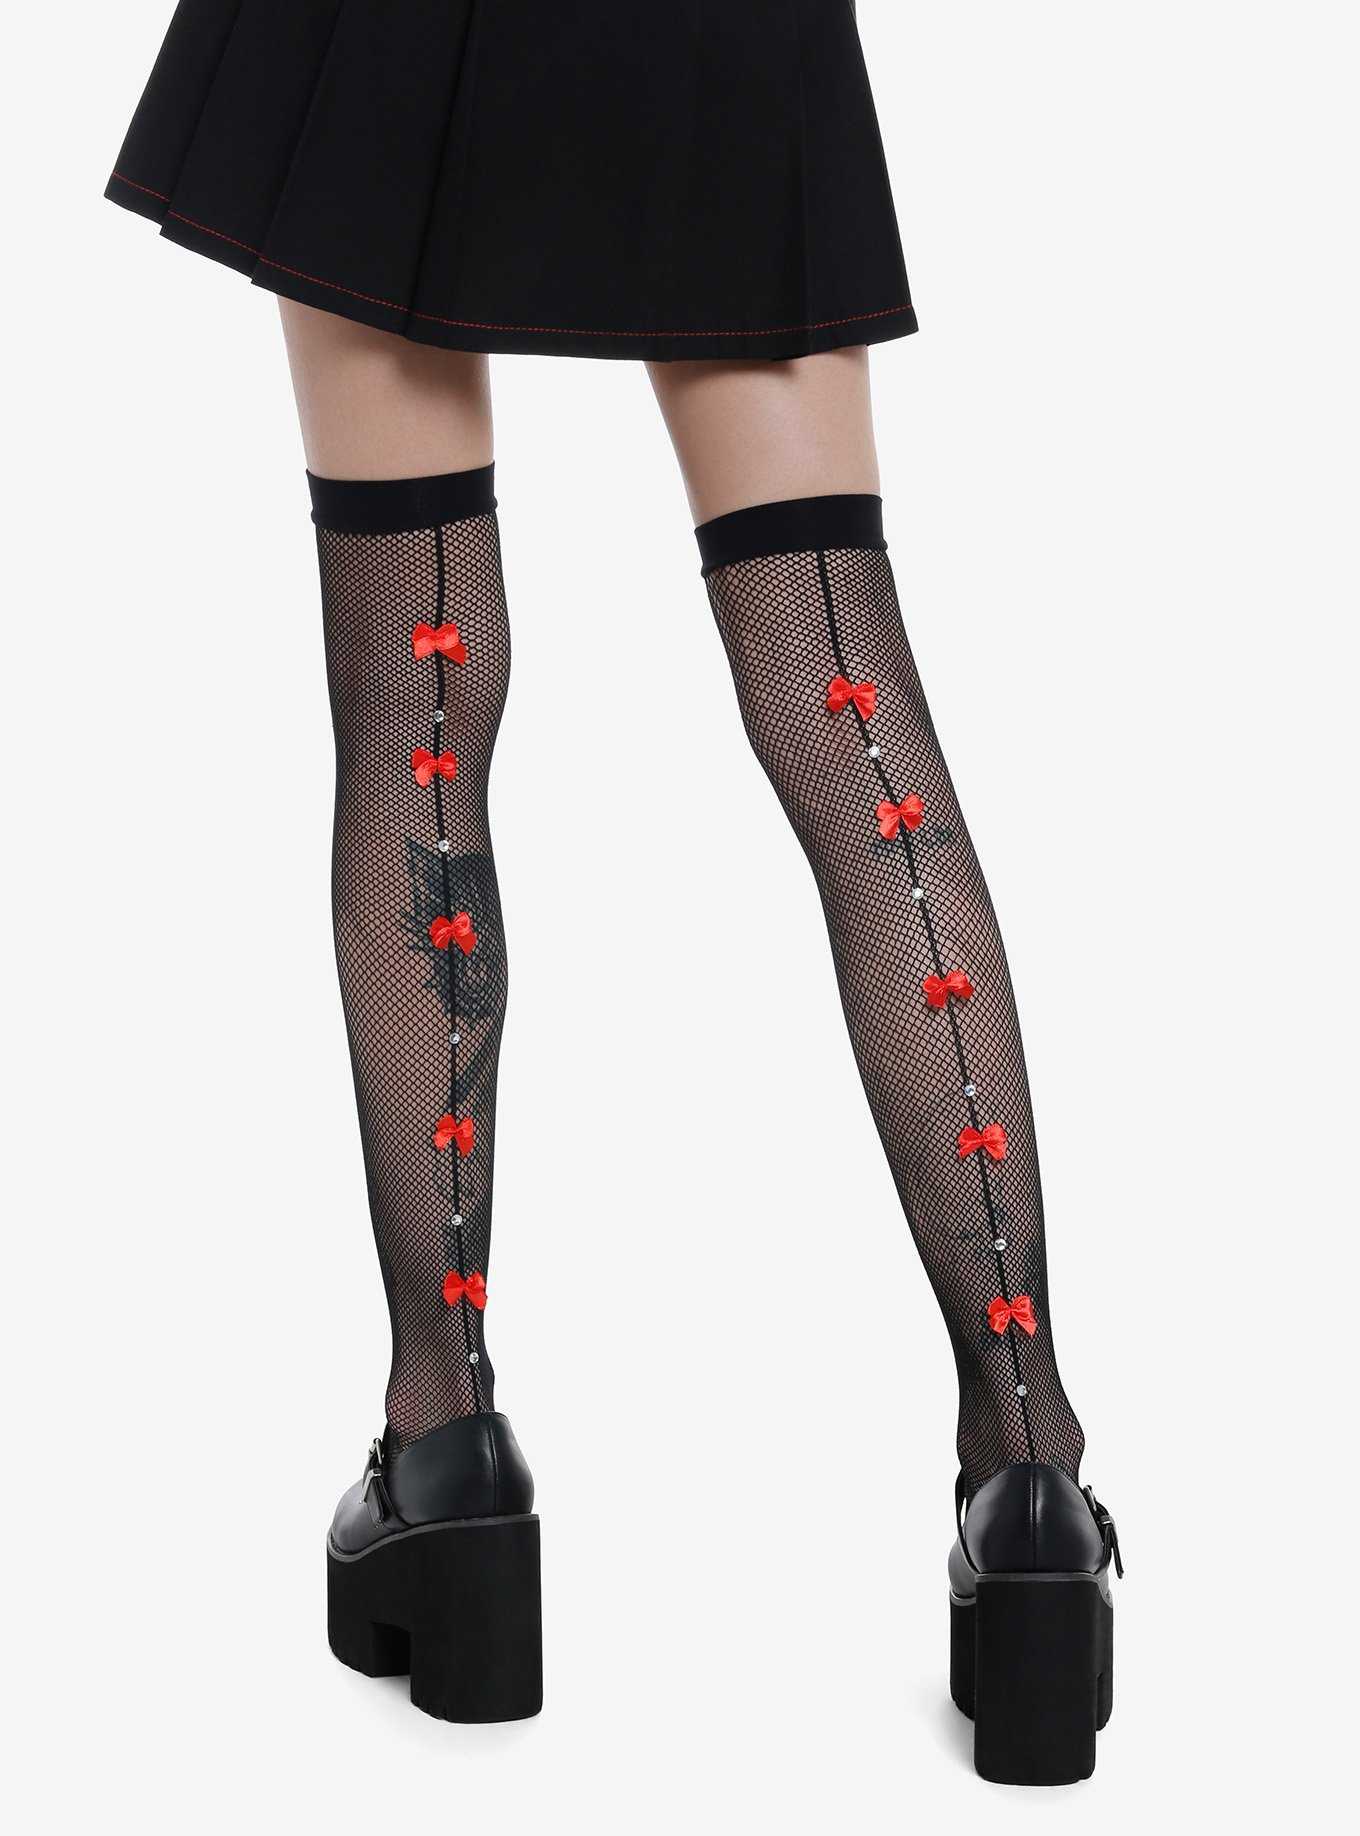 Hot Topic, Accessories, Hot Topic Black Lace Thigh High Tights Size Ml